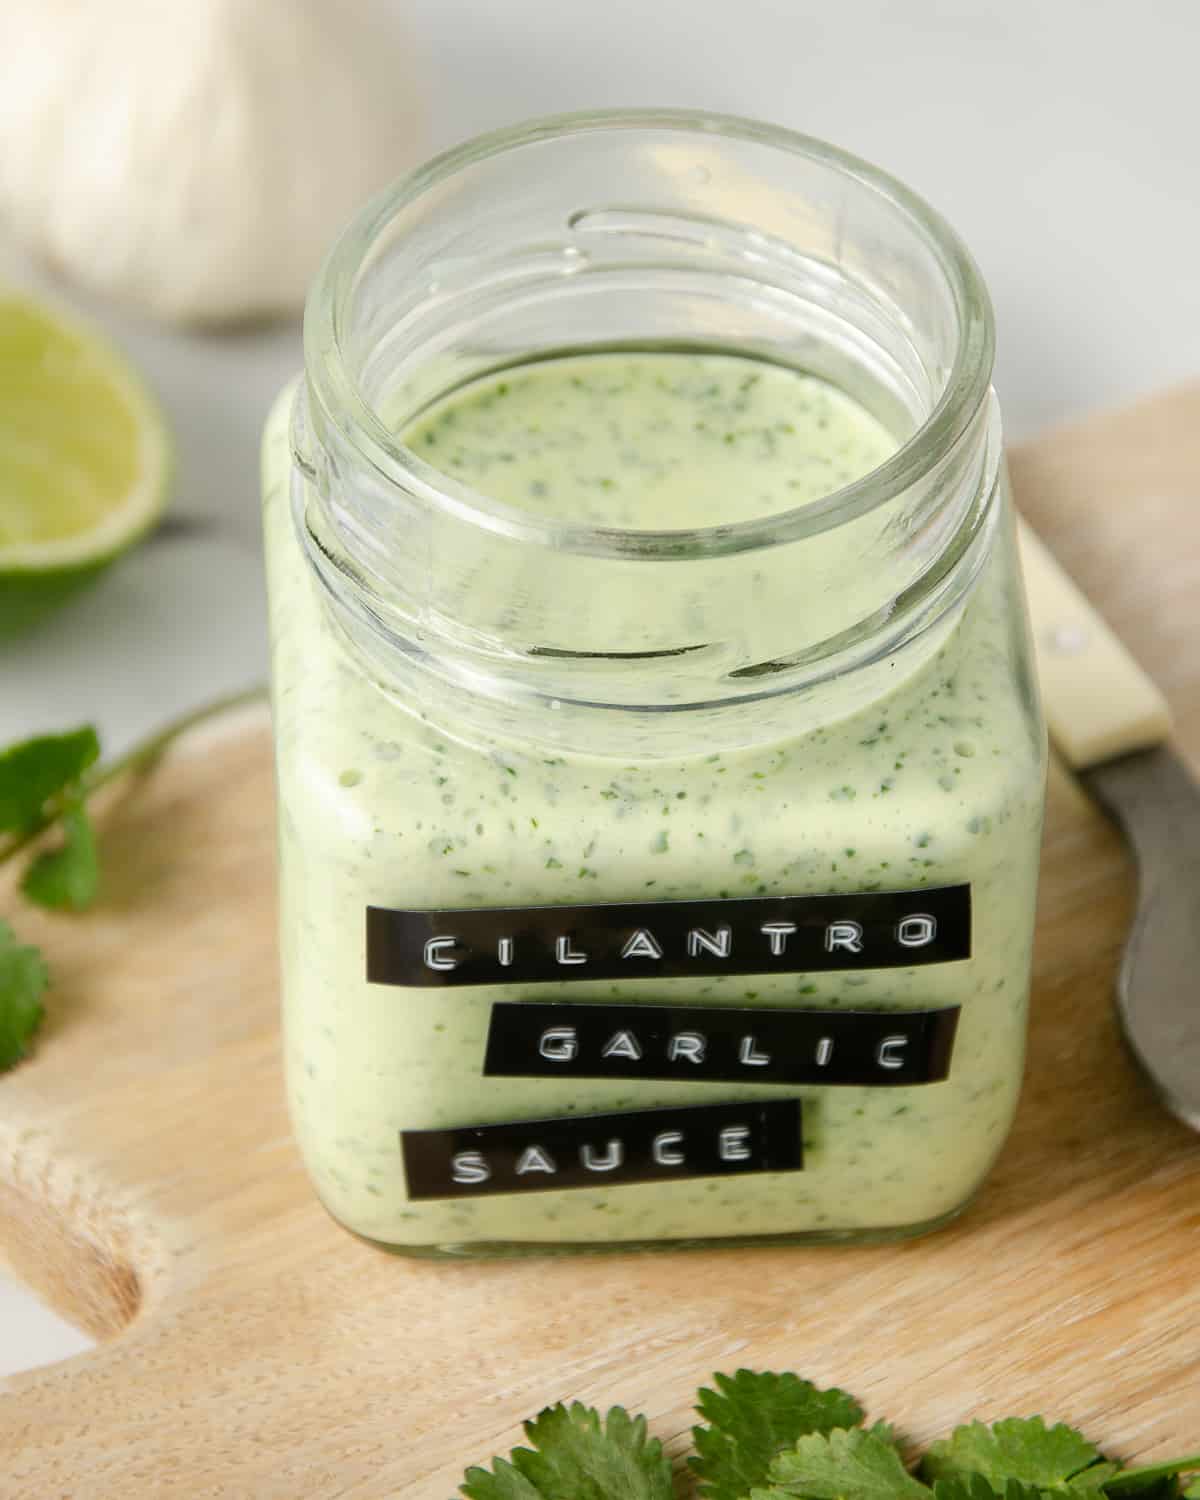 Blended cilantro garlic sauce in a jar on a cutting board with cilantro leaves next to it and limes and garlic in the background.